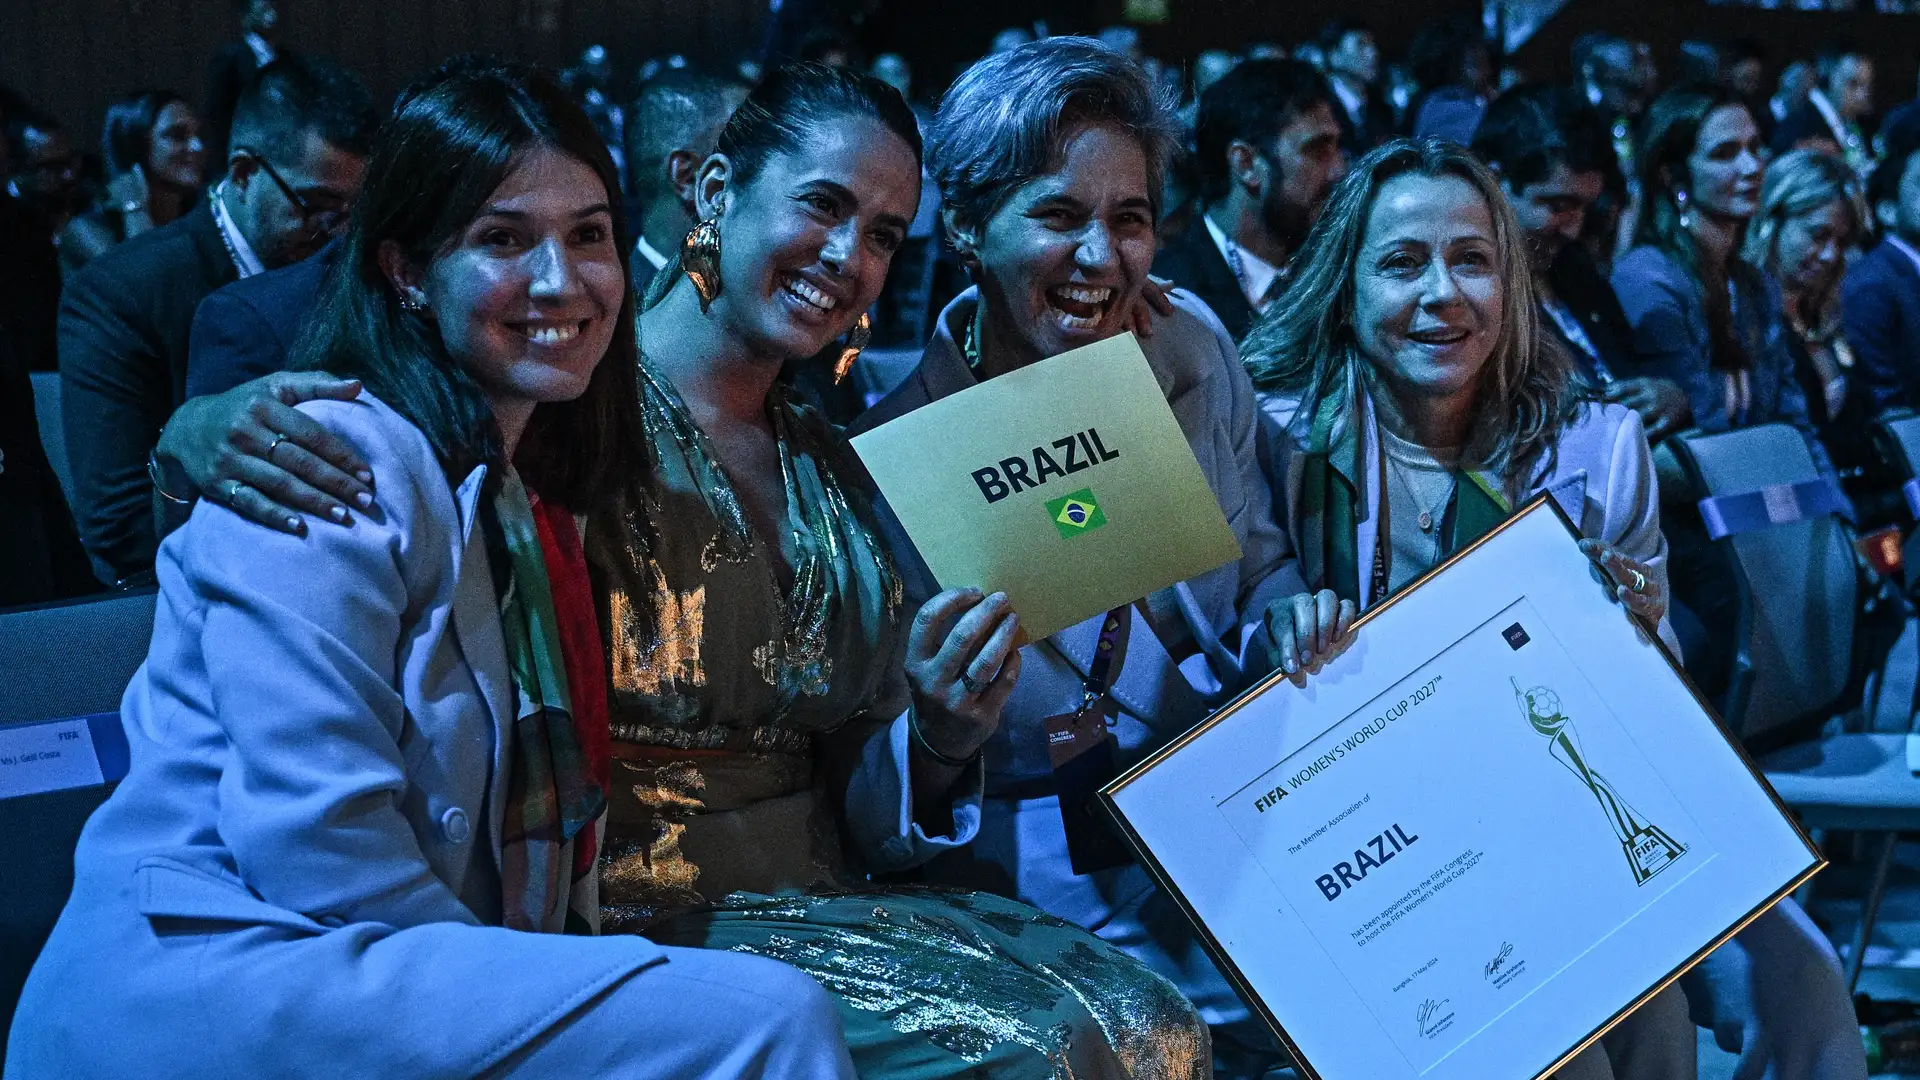 VIDEO: Brazil will host the 2027 Women’s World Cup! Netherlands, Belgium and Germany lose vote as bid team explode in excitement